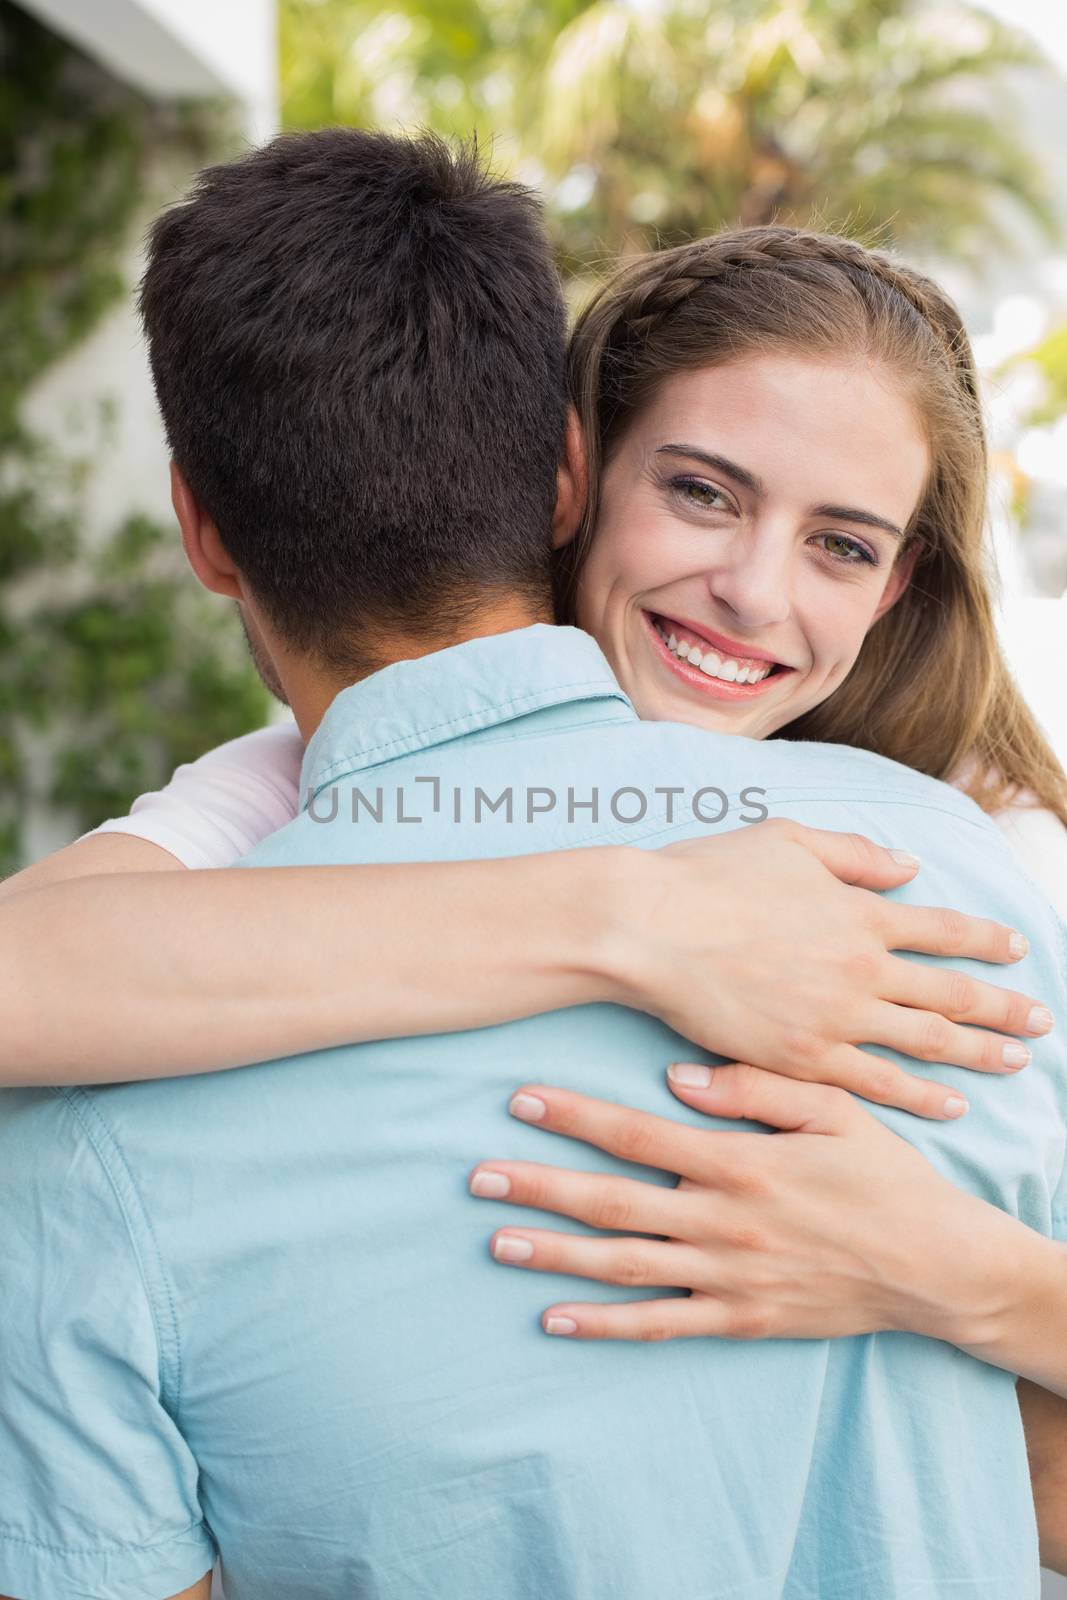 Close-up portrait of a loving young couple embracing outdoors